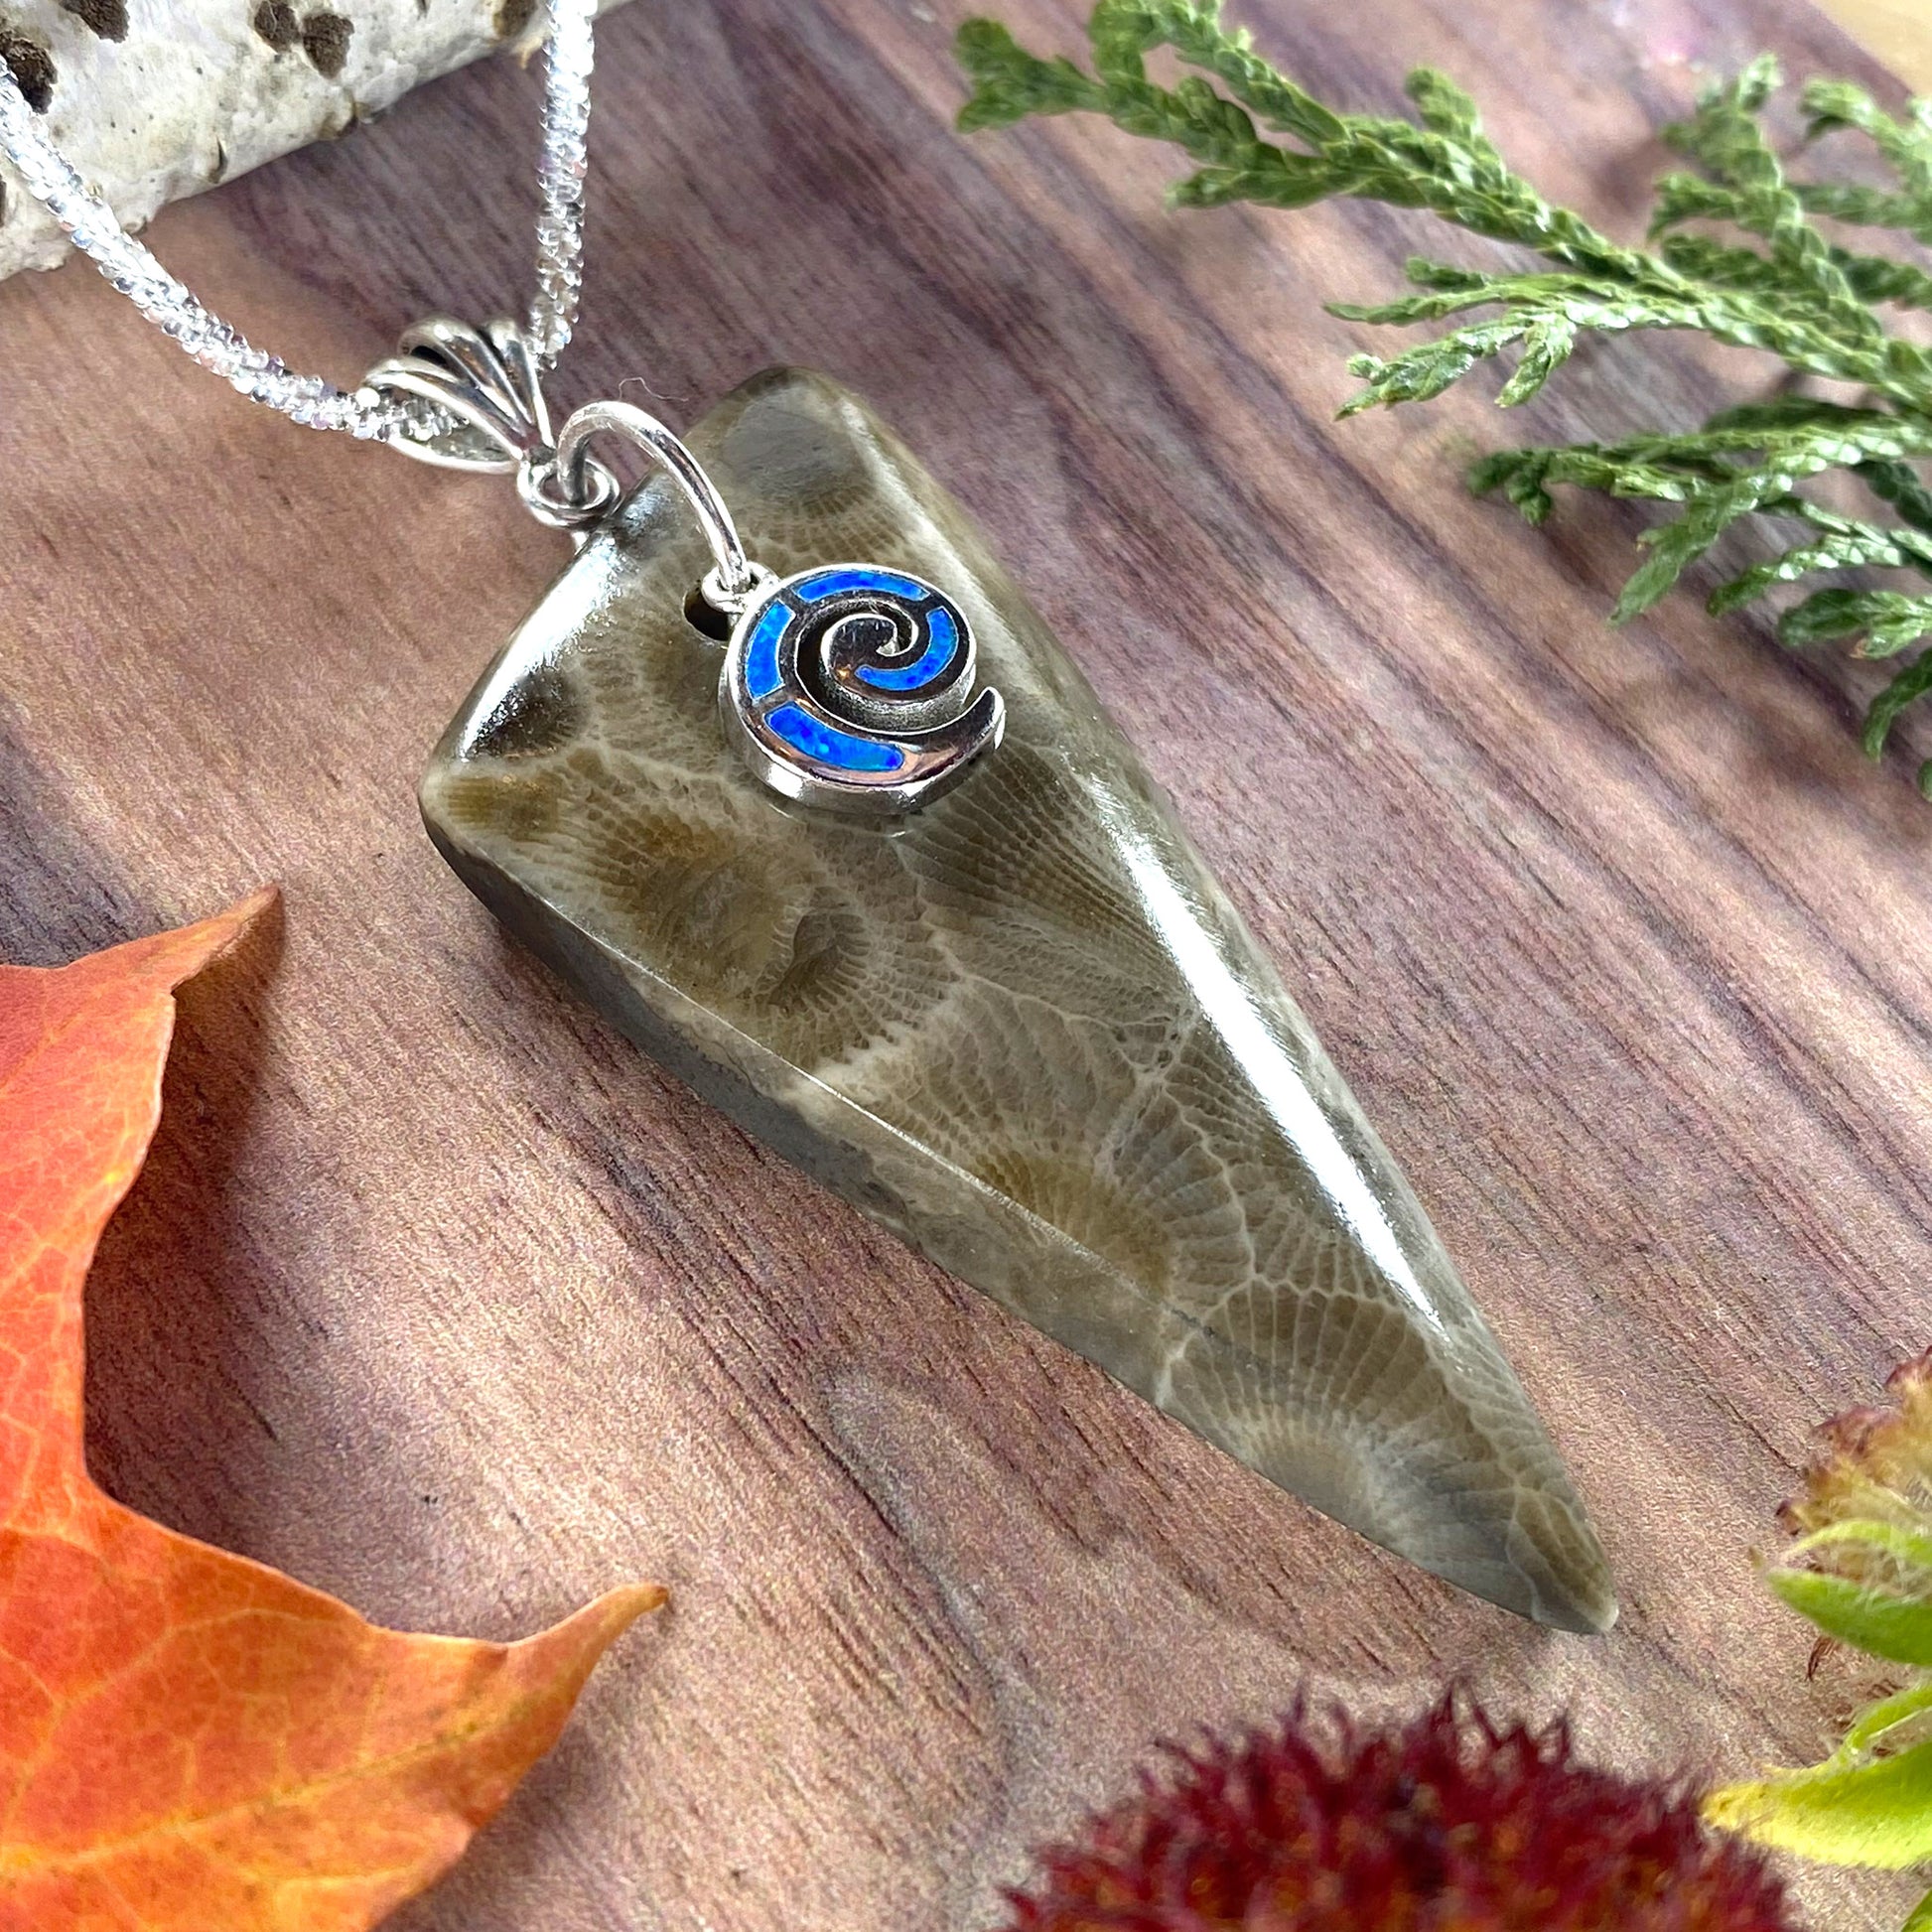 Petoskey Stone Swirl Charm Pendant Front View II - Stone Treasures by the Lake